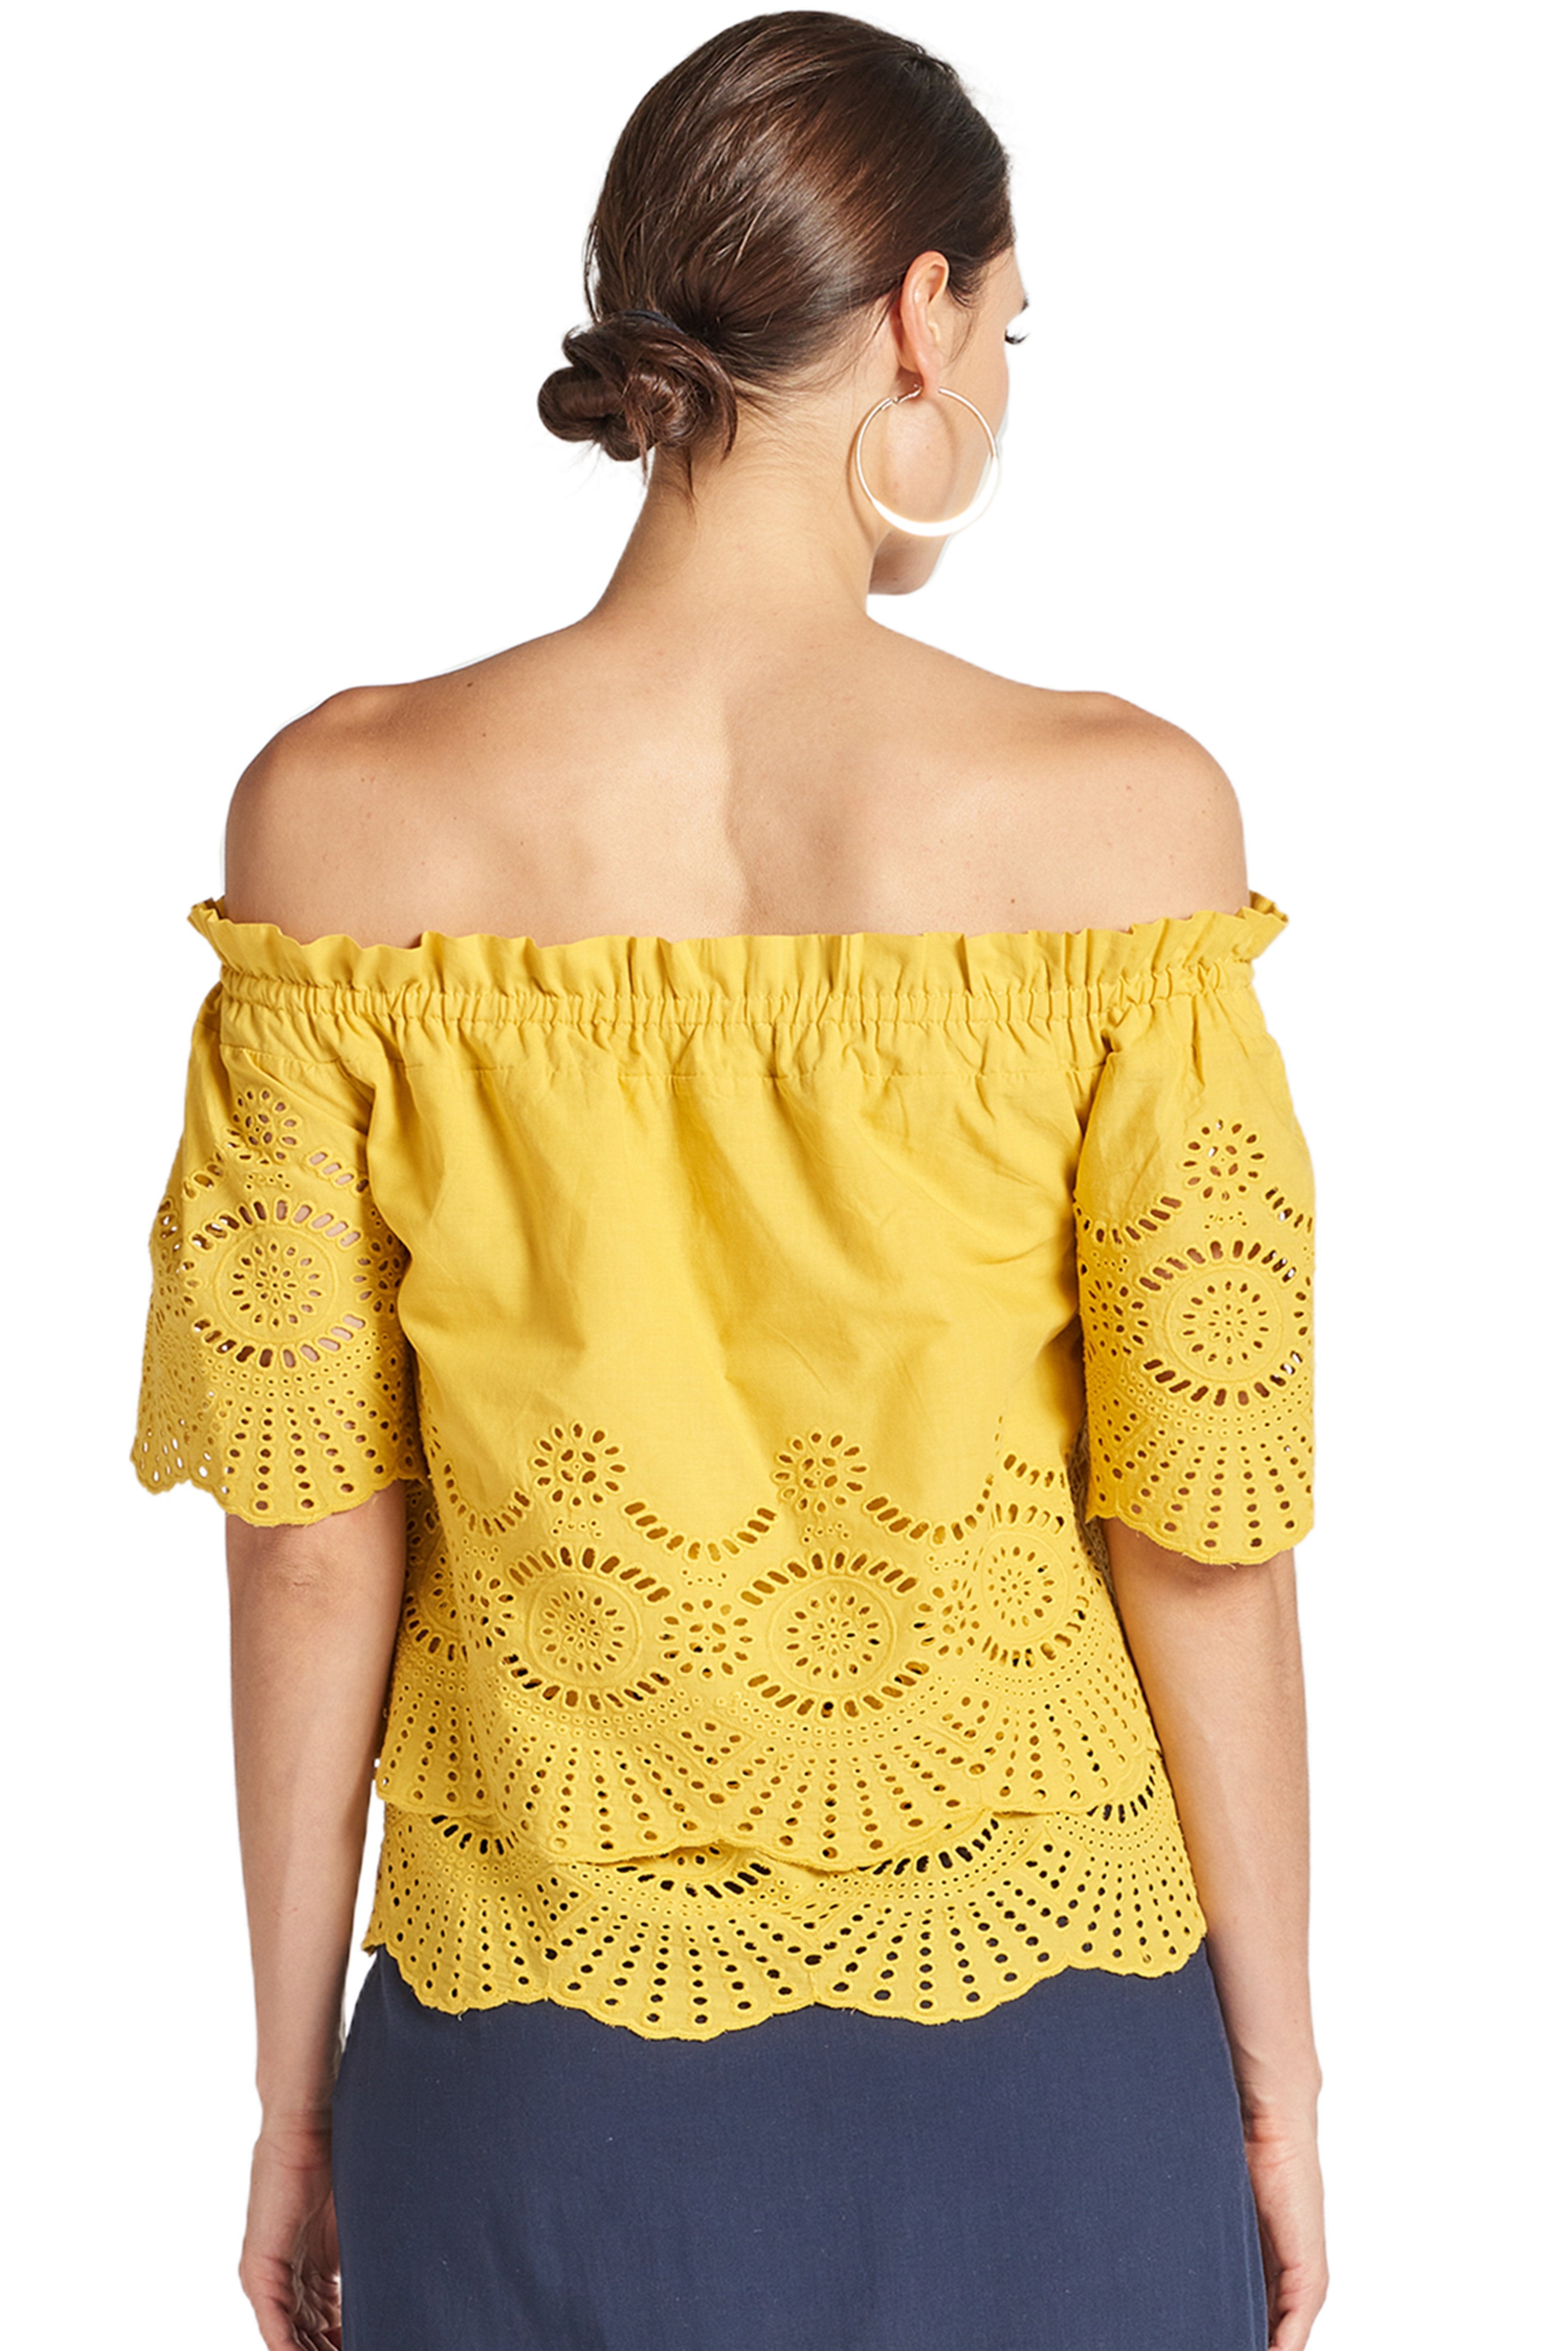 Back view of model wearing yellow off the shoulder cotton eyelet top with scalloped short sleeves and scalloped bottom hem.